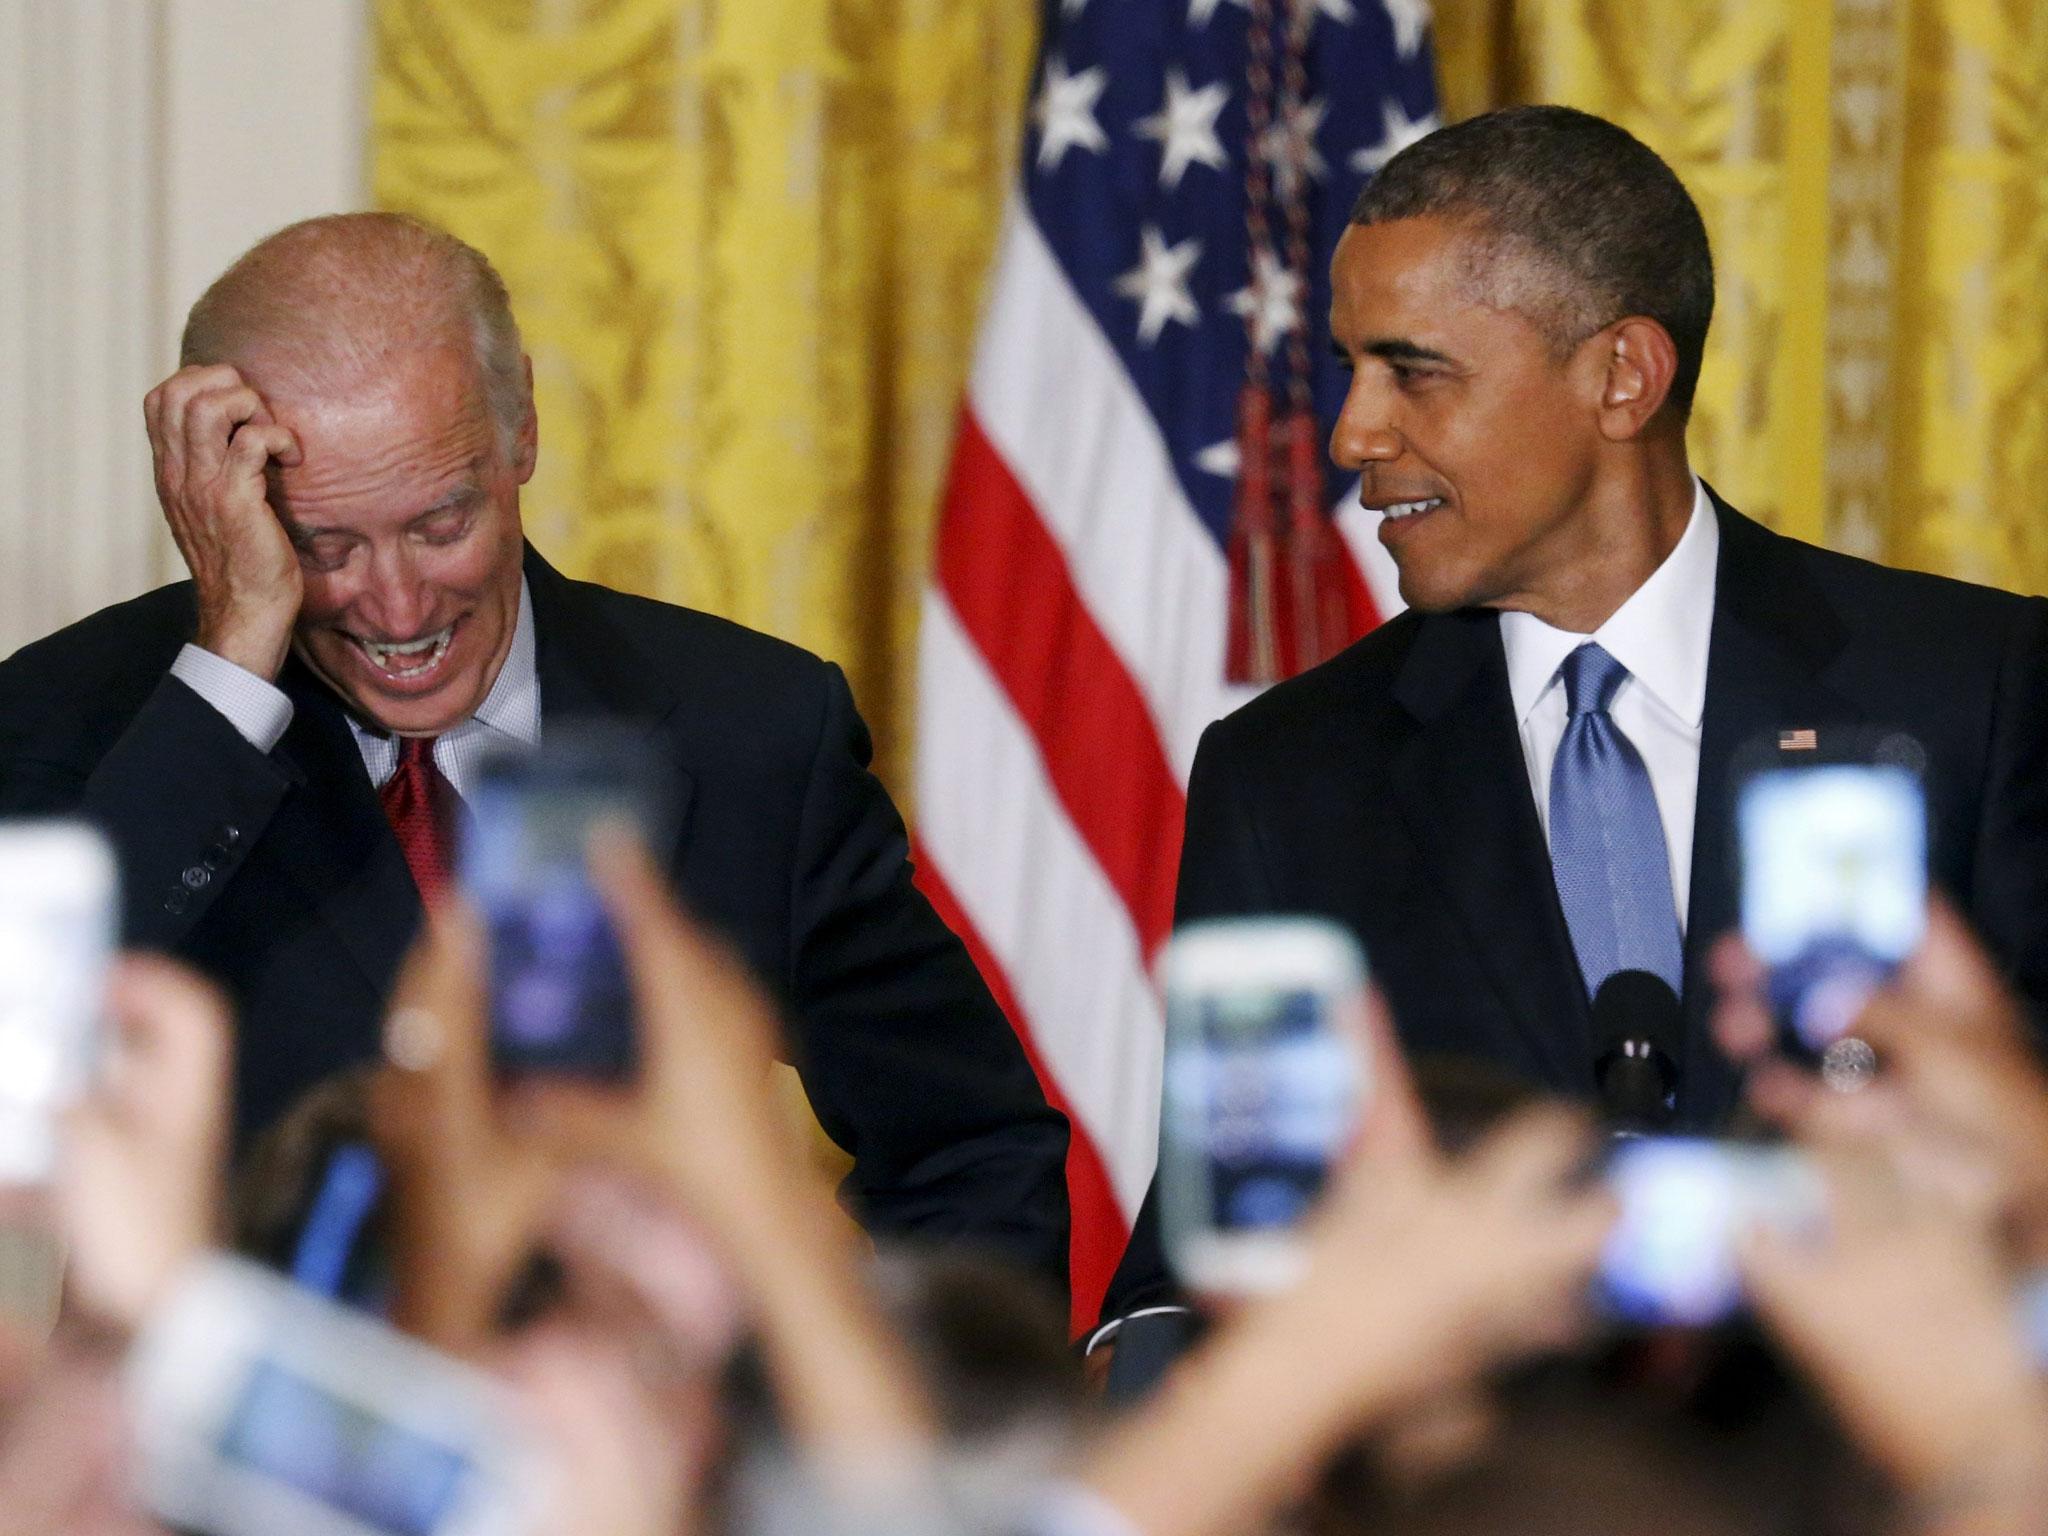 Obama and Vice President Joe Biden react after a heckler was removed for their extended interruption (Reuters)